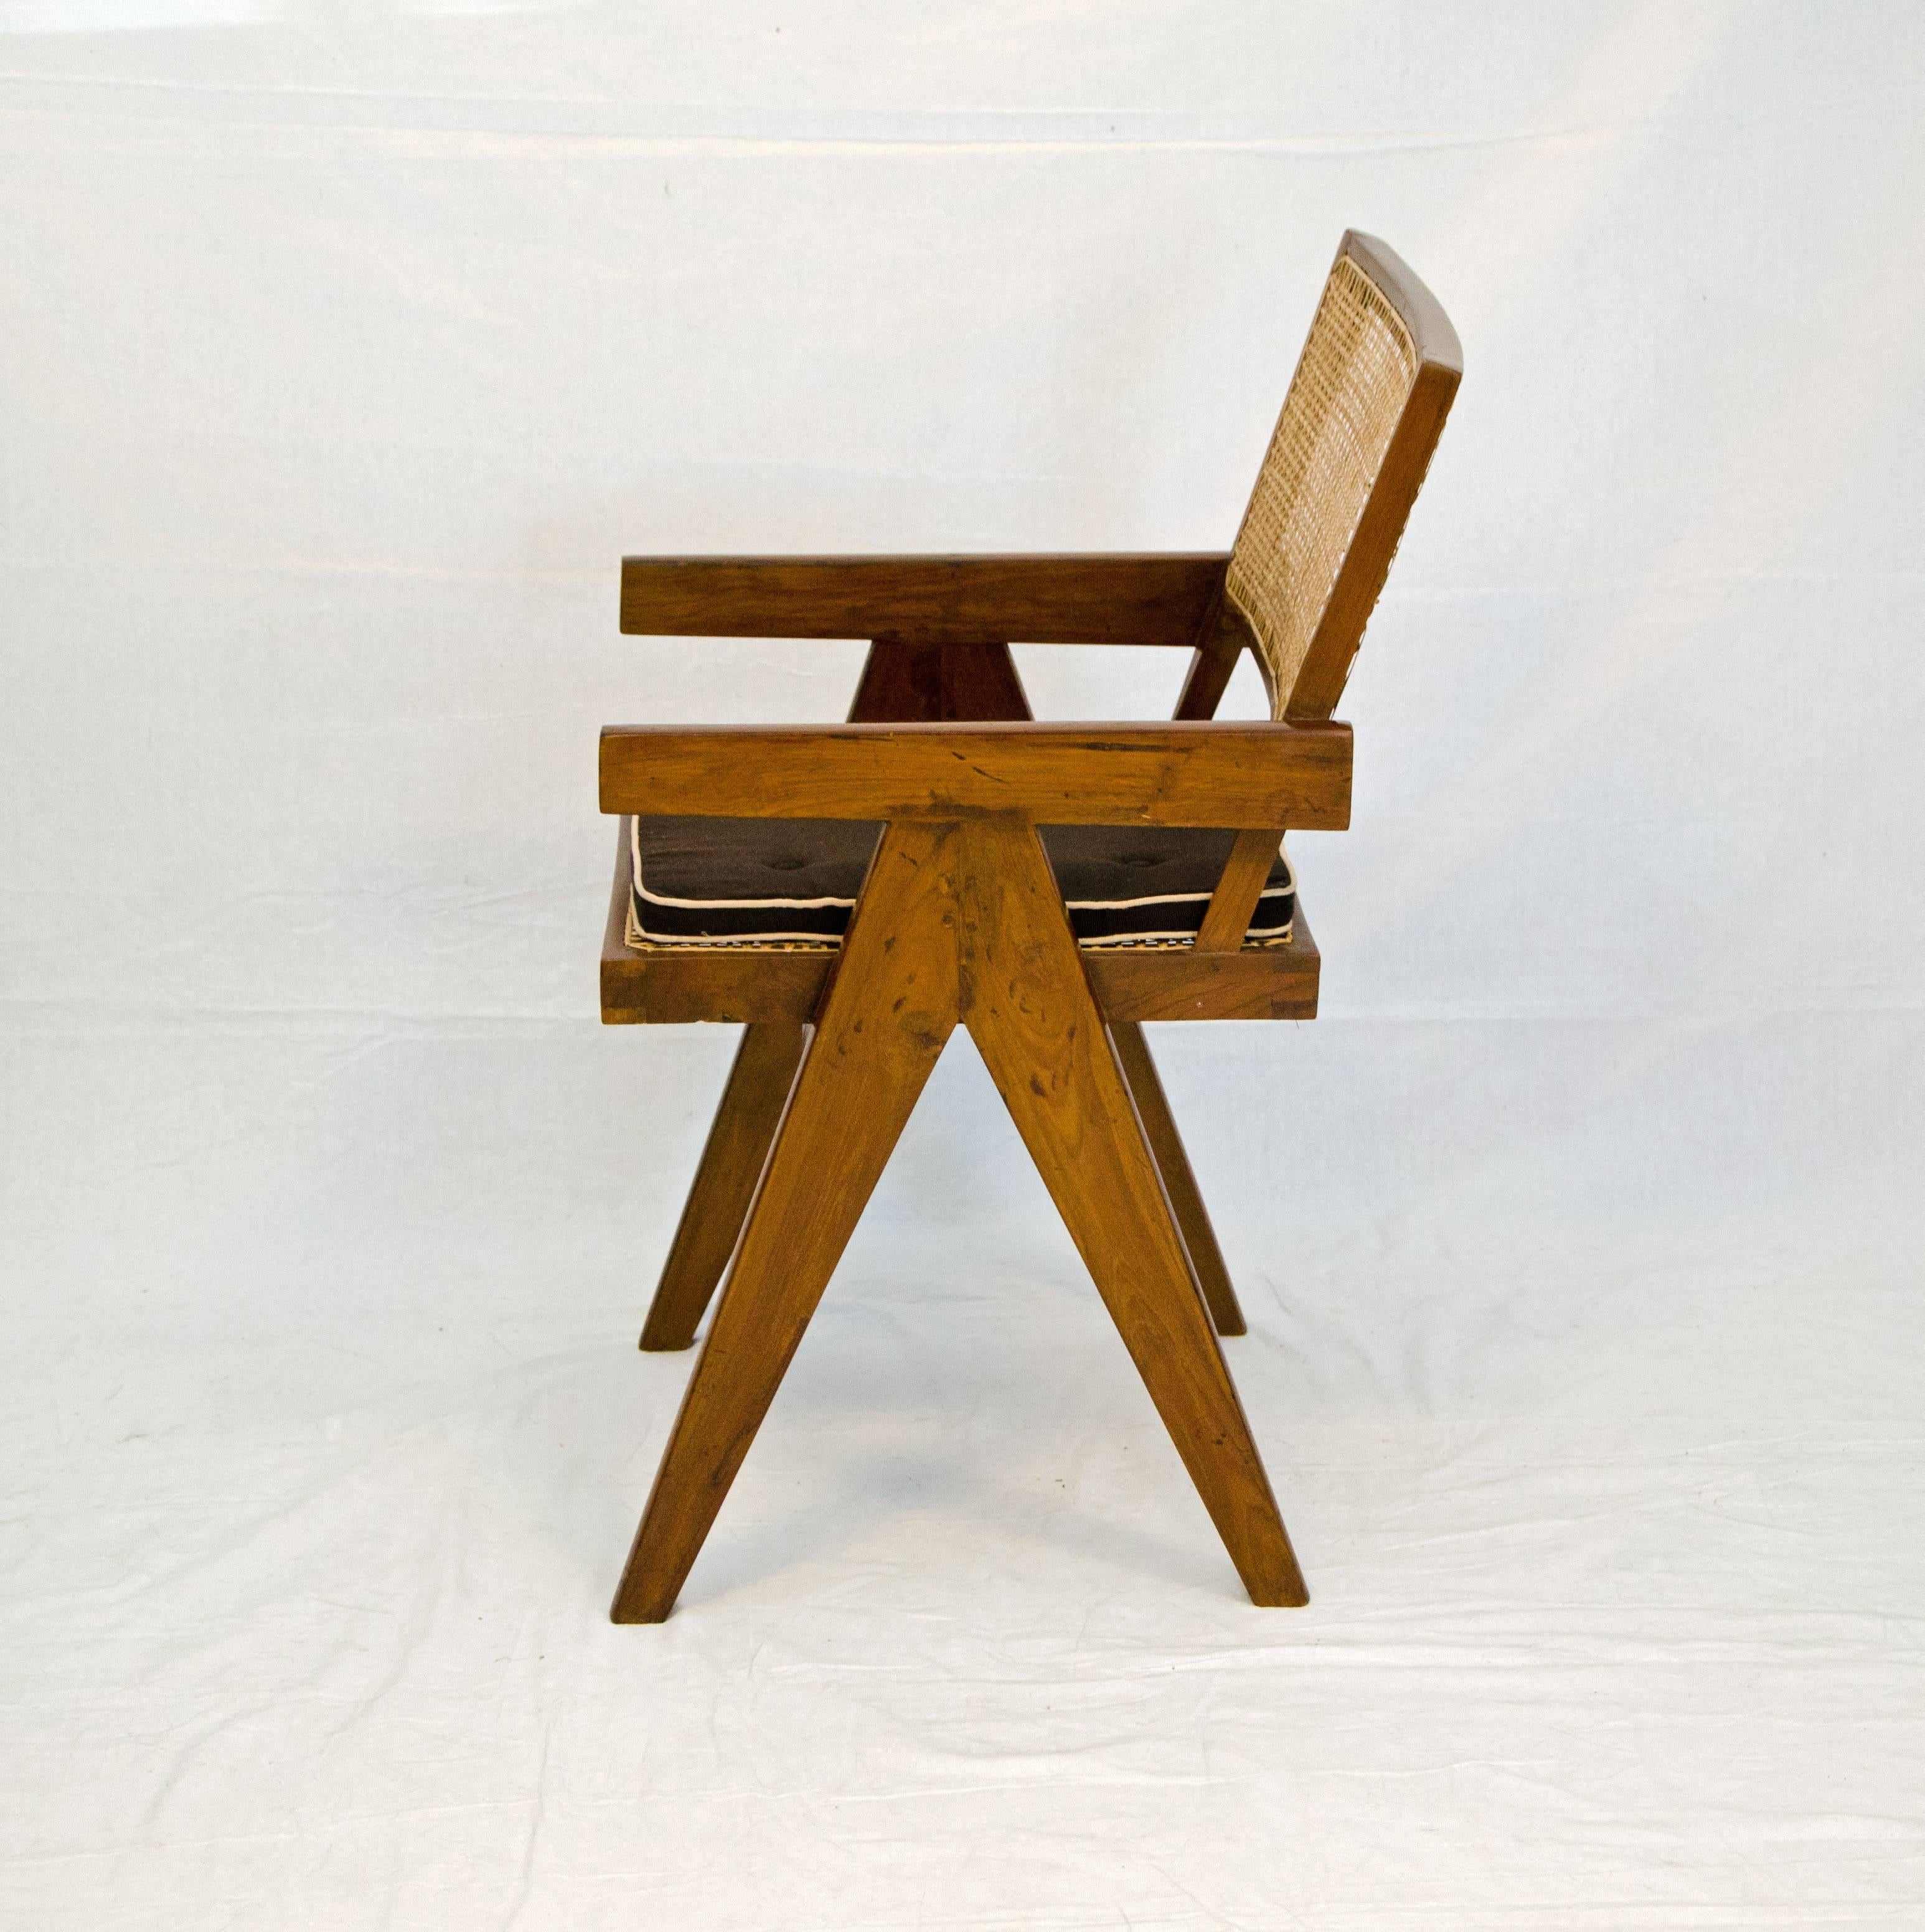 Very simple designed office chair for university offices in Chandigarh, India. A collaboration by architect and furniture designers Pierre Jeanneret and his cousin Charles Edouard Jeanneret, better known as Le Corbusier.